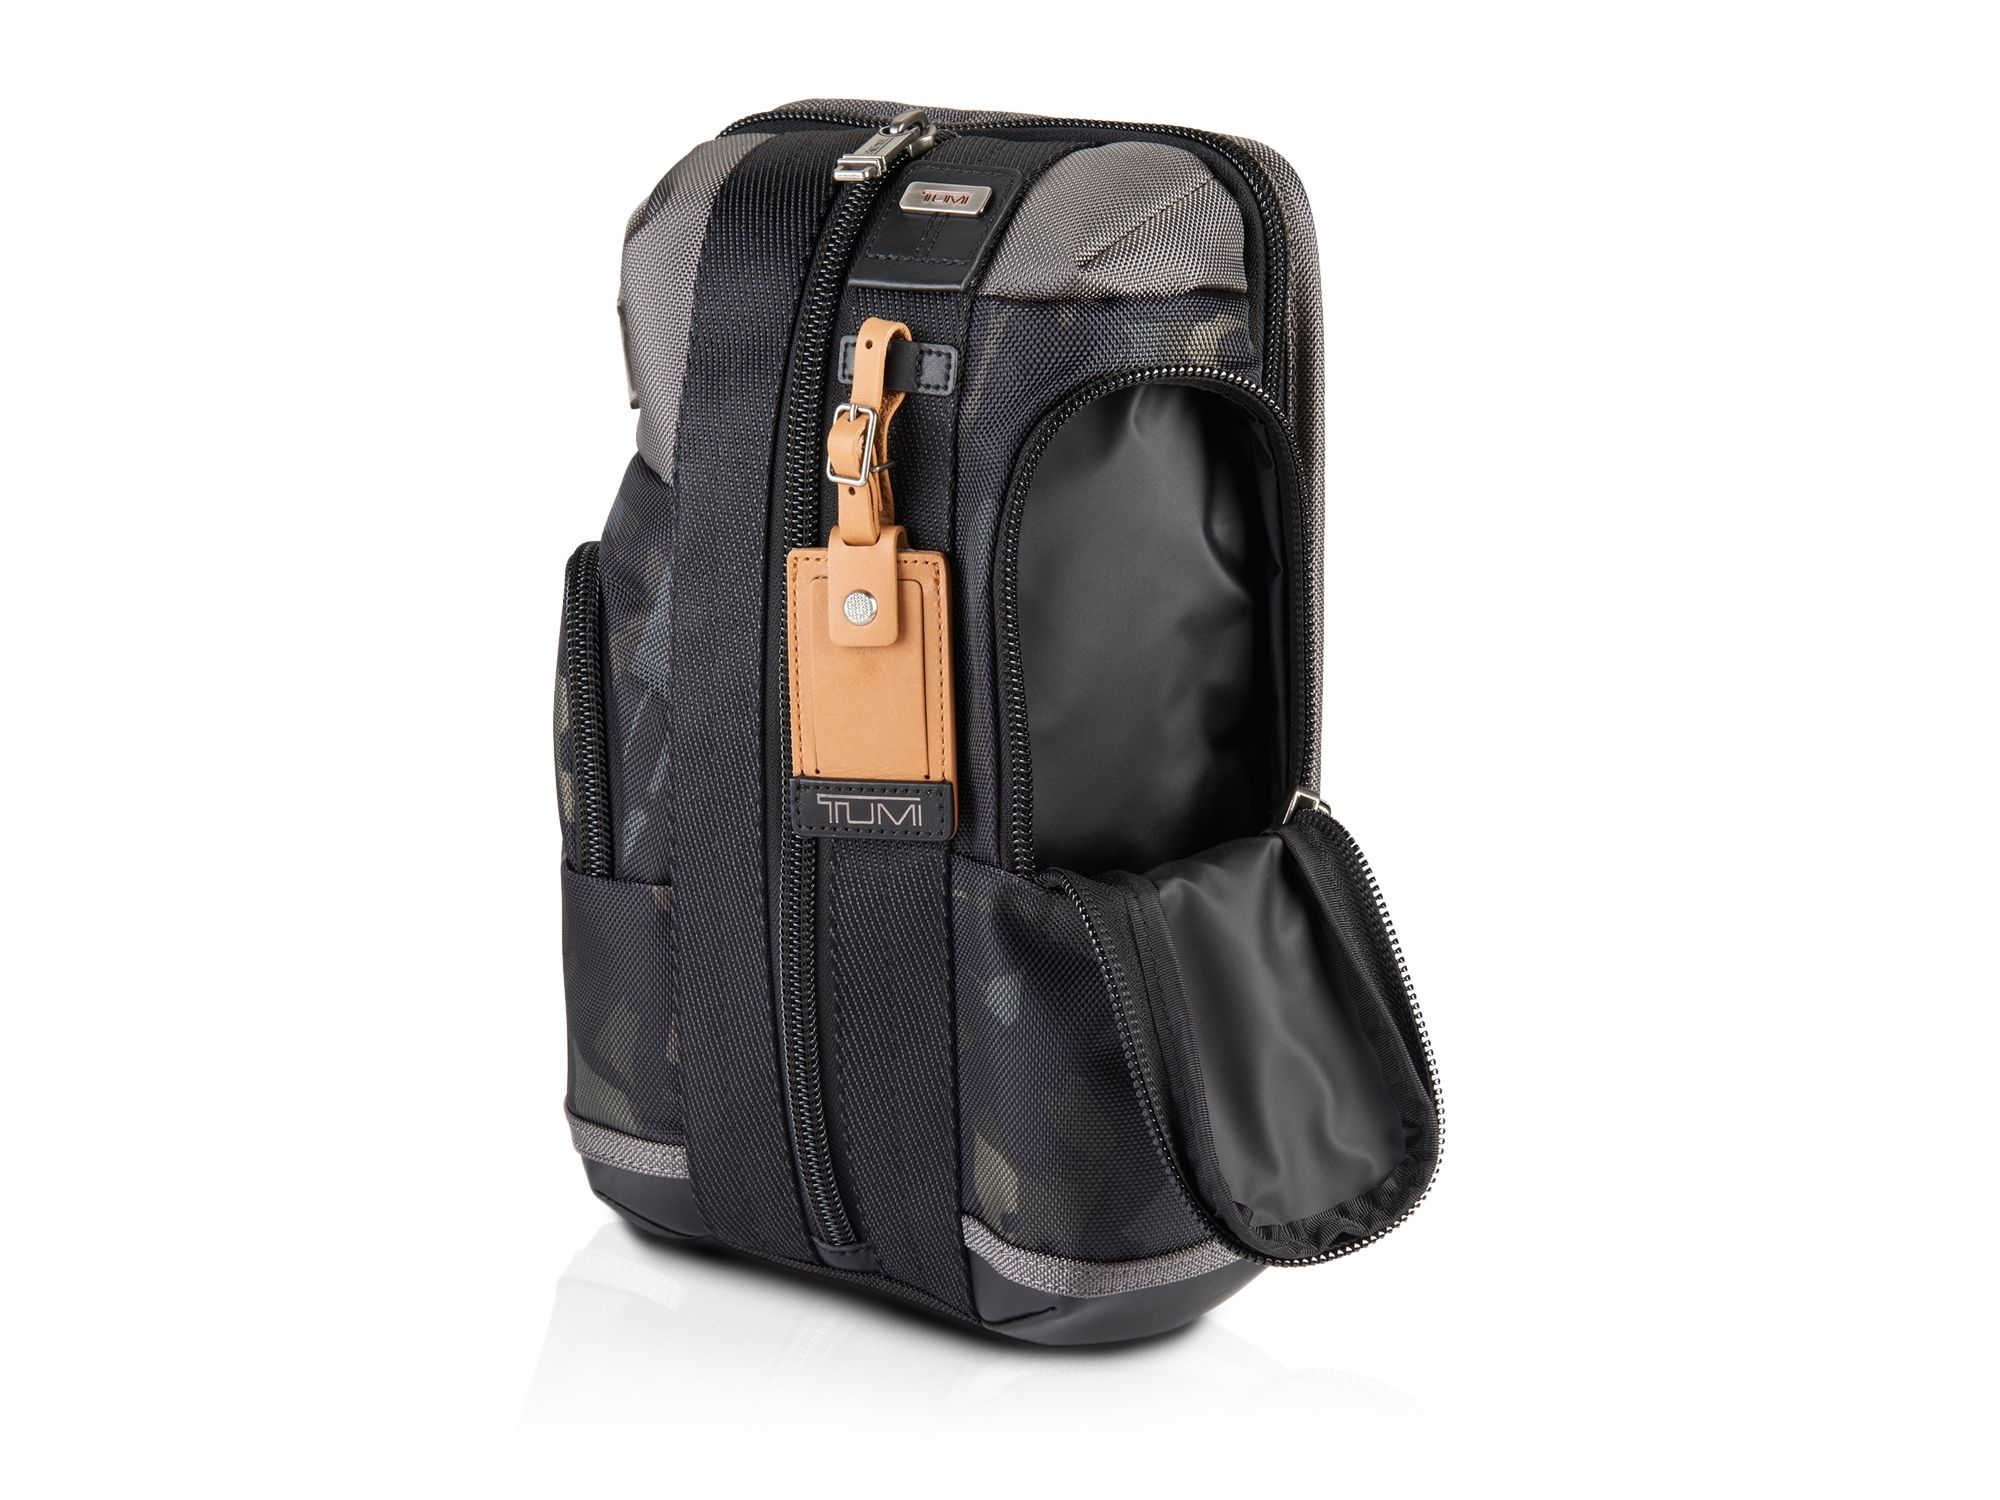 Paul smith synthetic naked lady camo rolltop backpack in black